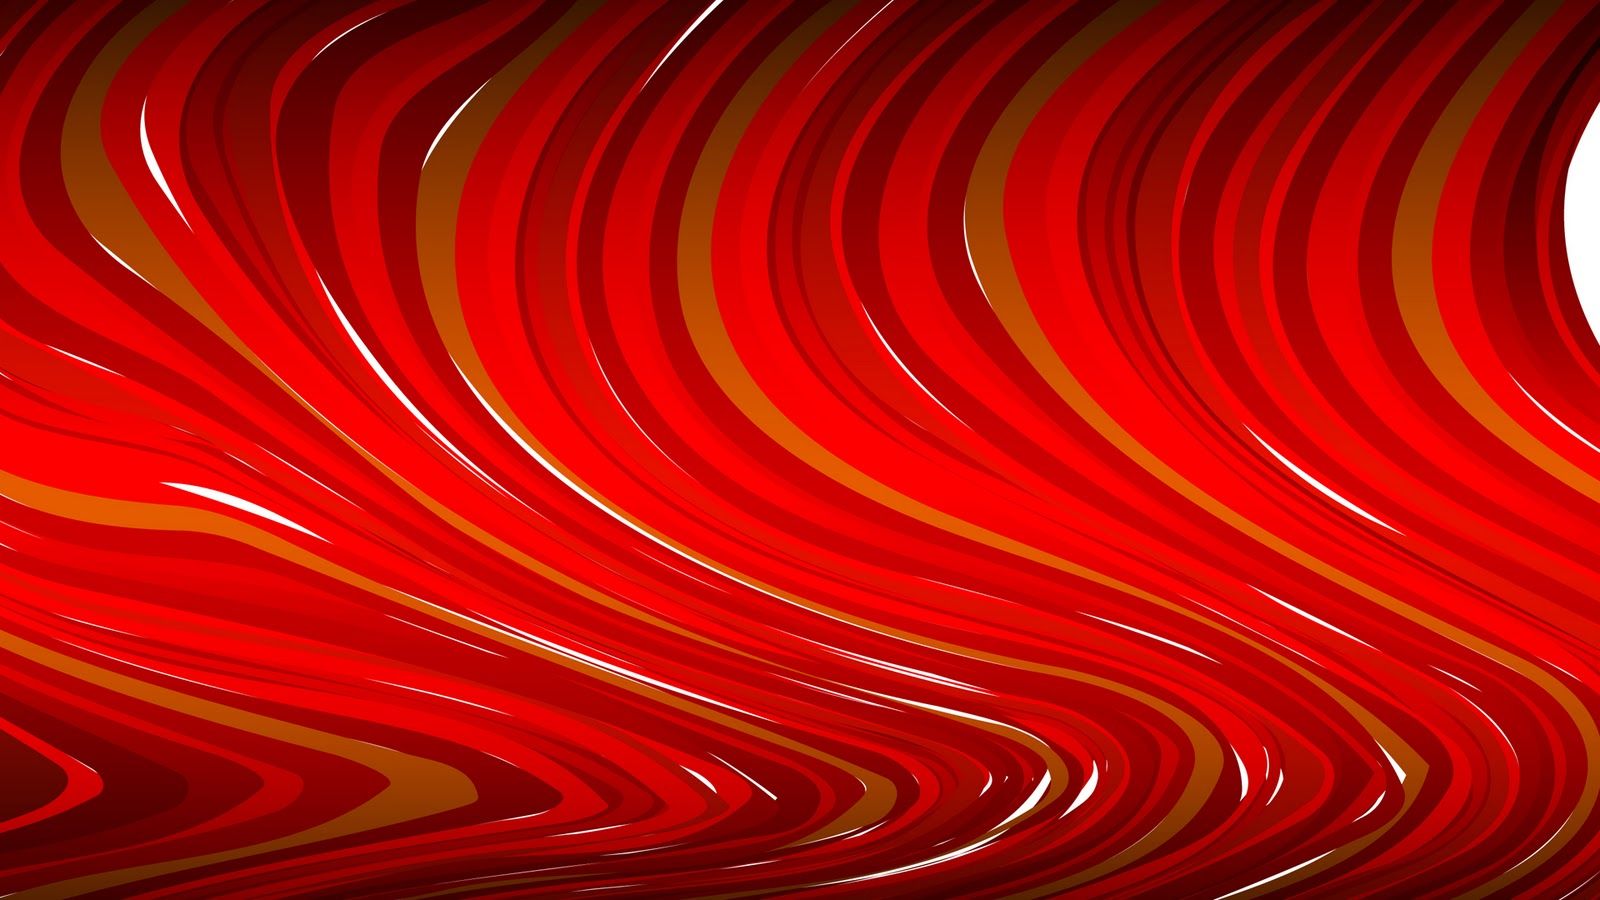 trololo blogg: Red And Gold Wallpaper Uk